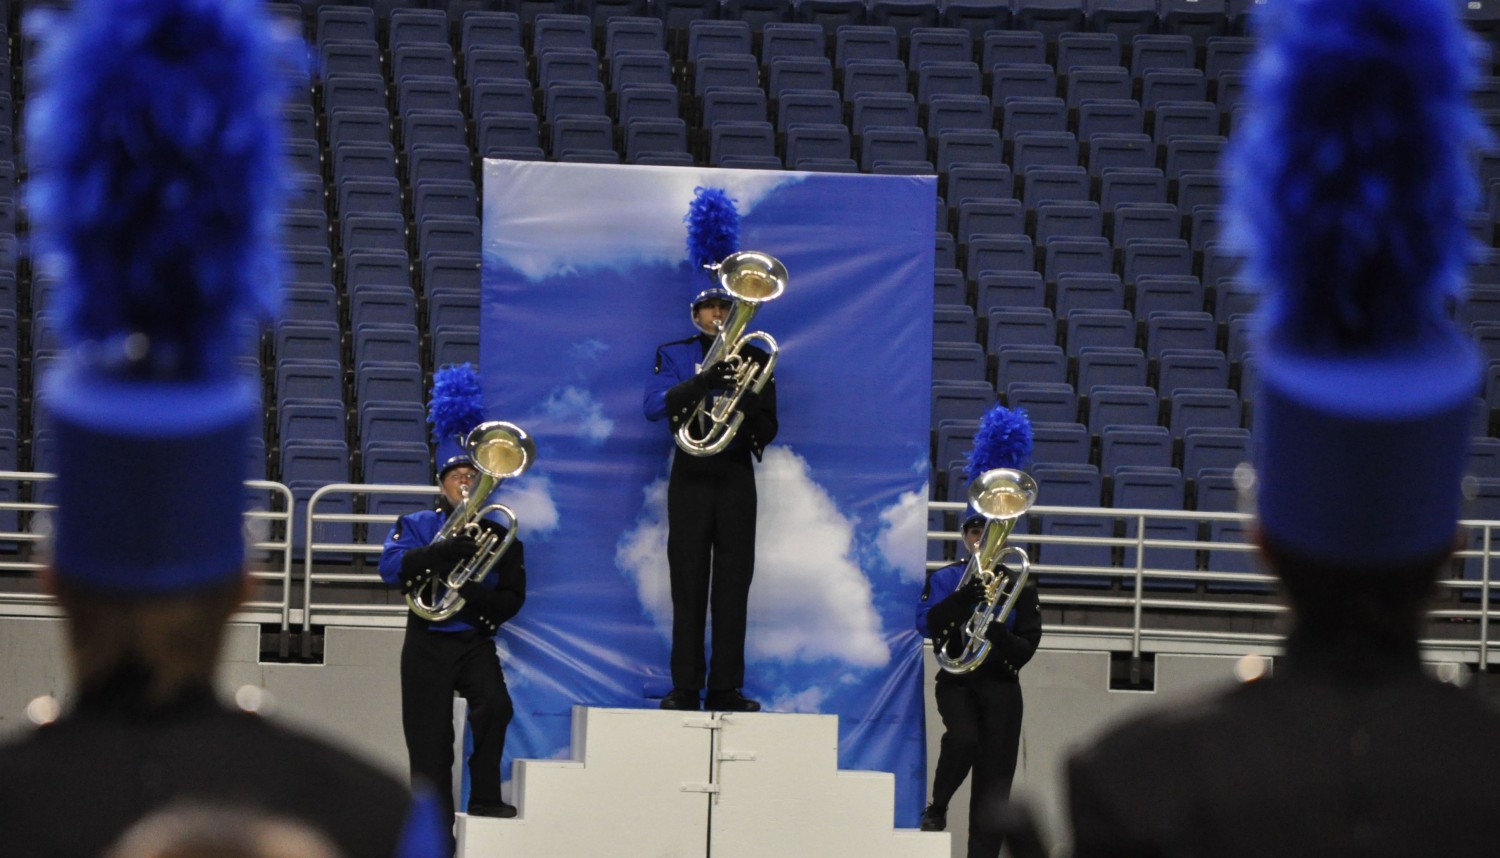 Each band created its own theme with the music selection and props. Johnson High School took home tenth place this year in the 5A competition.